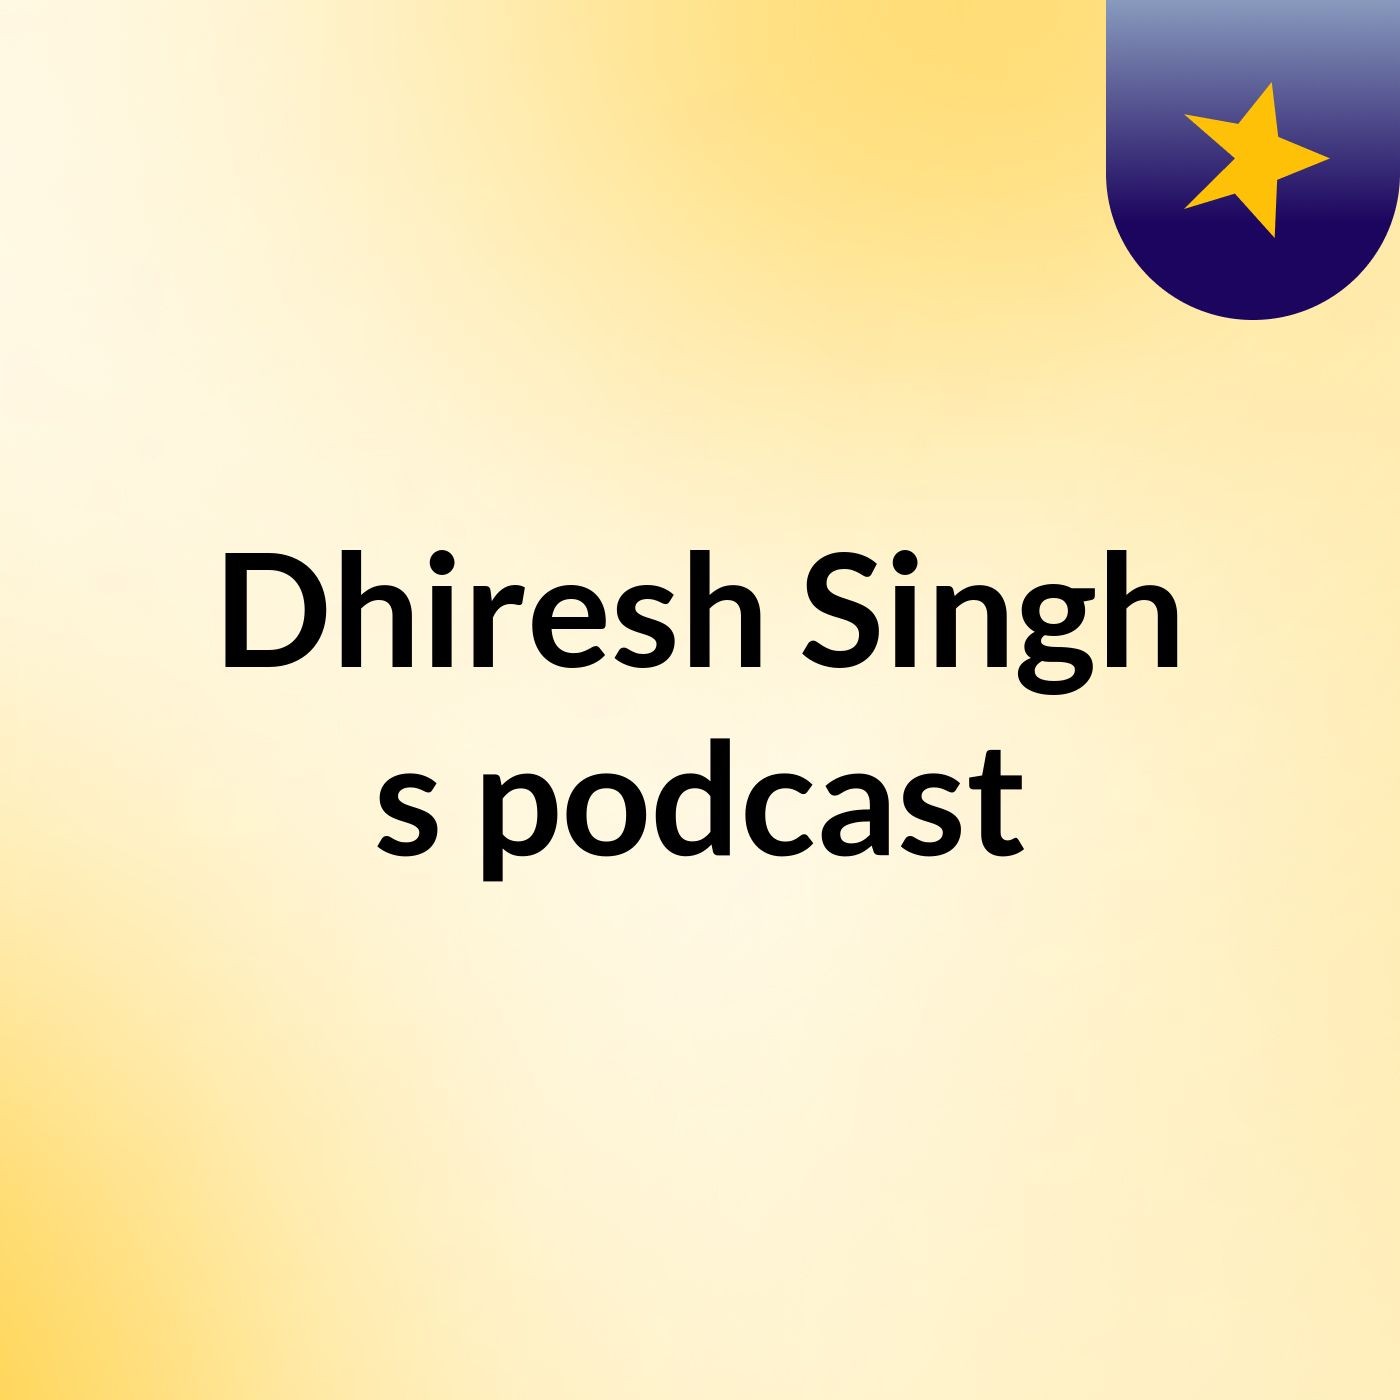 Episode 4 - Dhiresh Singh's podcast